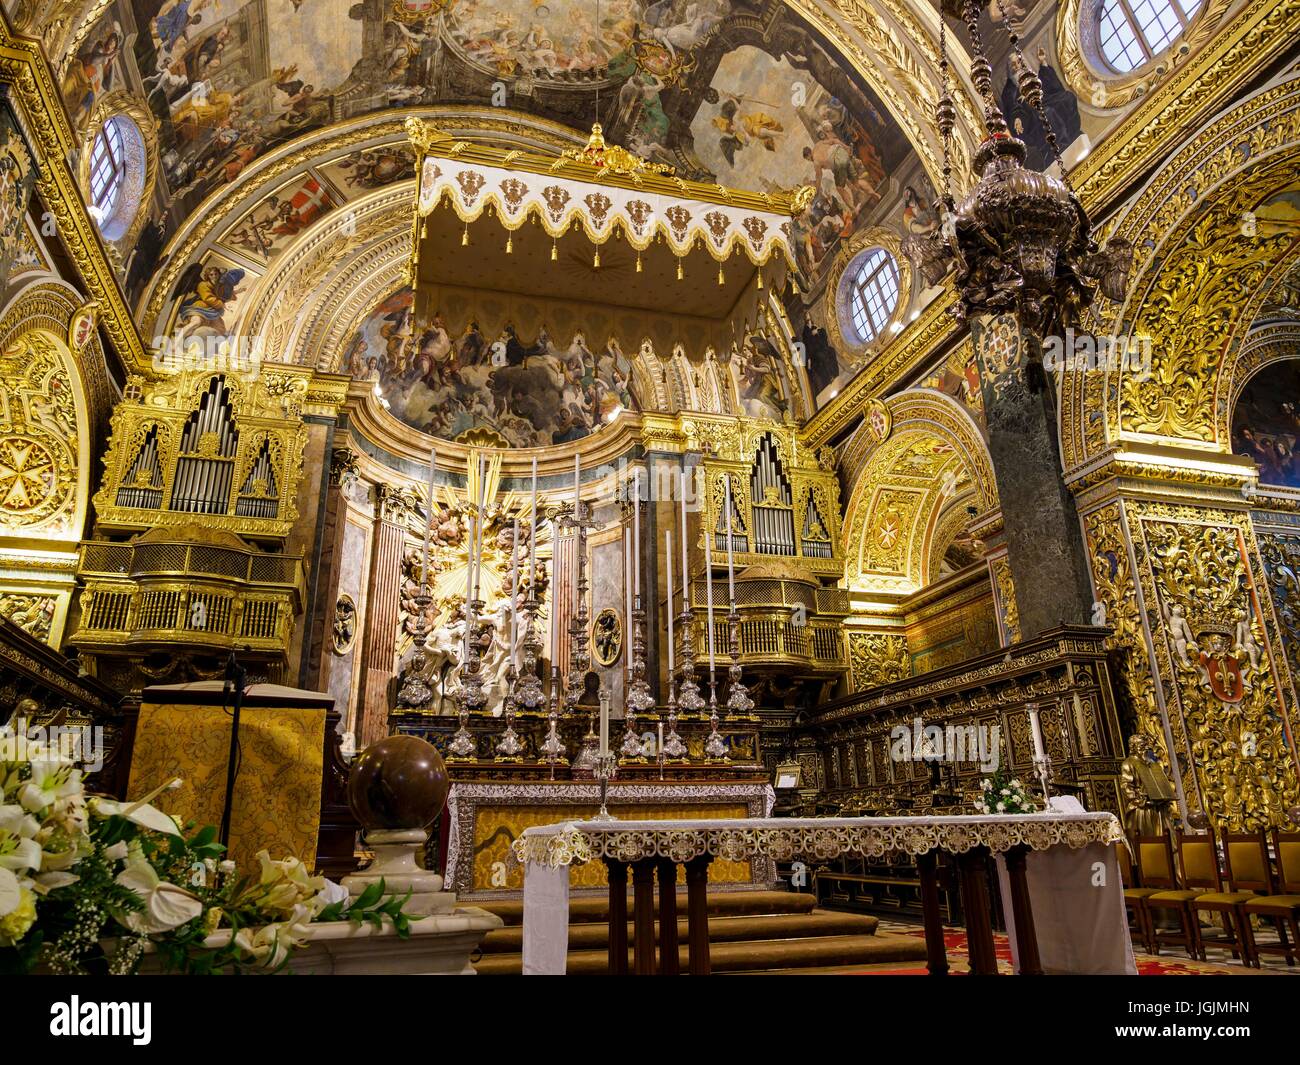 The sanctuary of St. John's Co-Cathedral at the capital Valletta / Malta Stock Photo